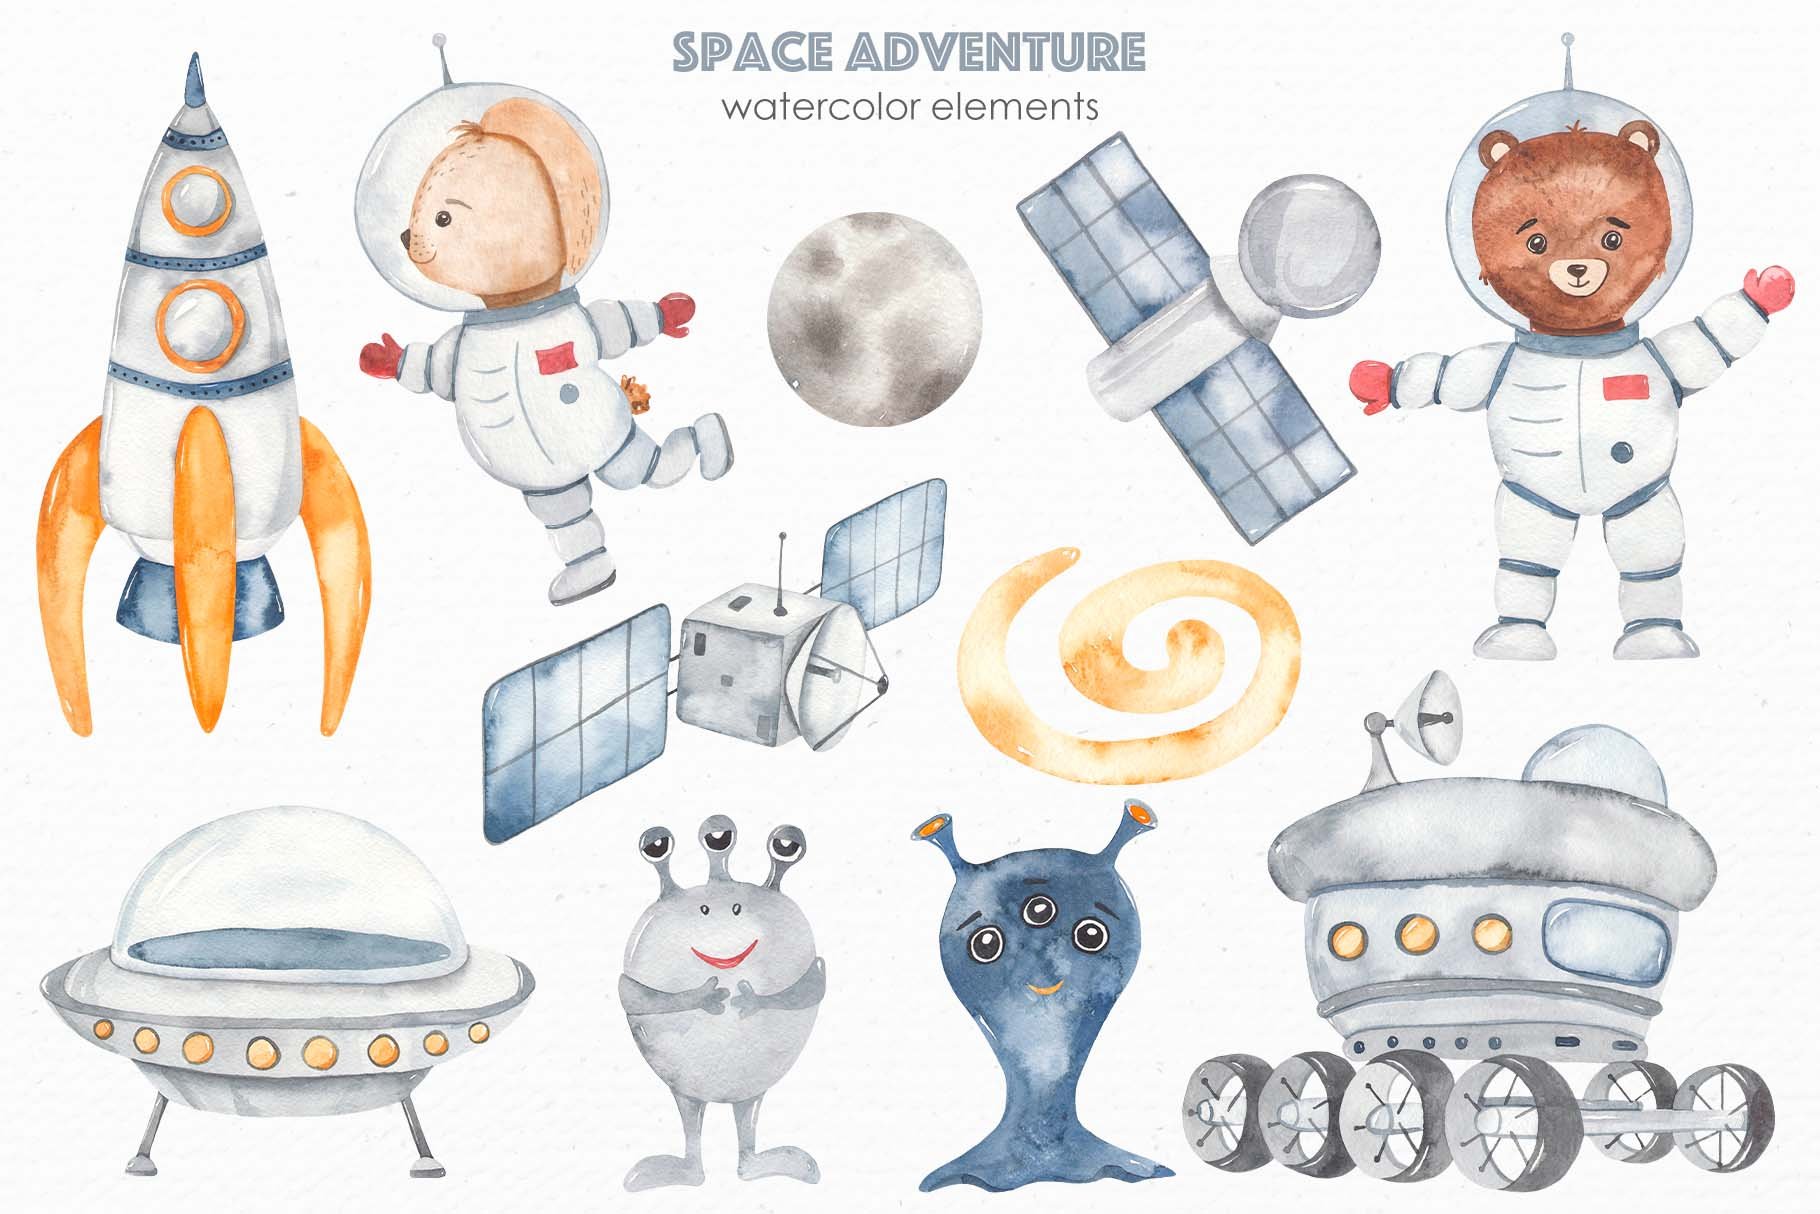 Space adventure watercolor preview image.